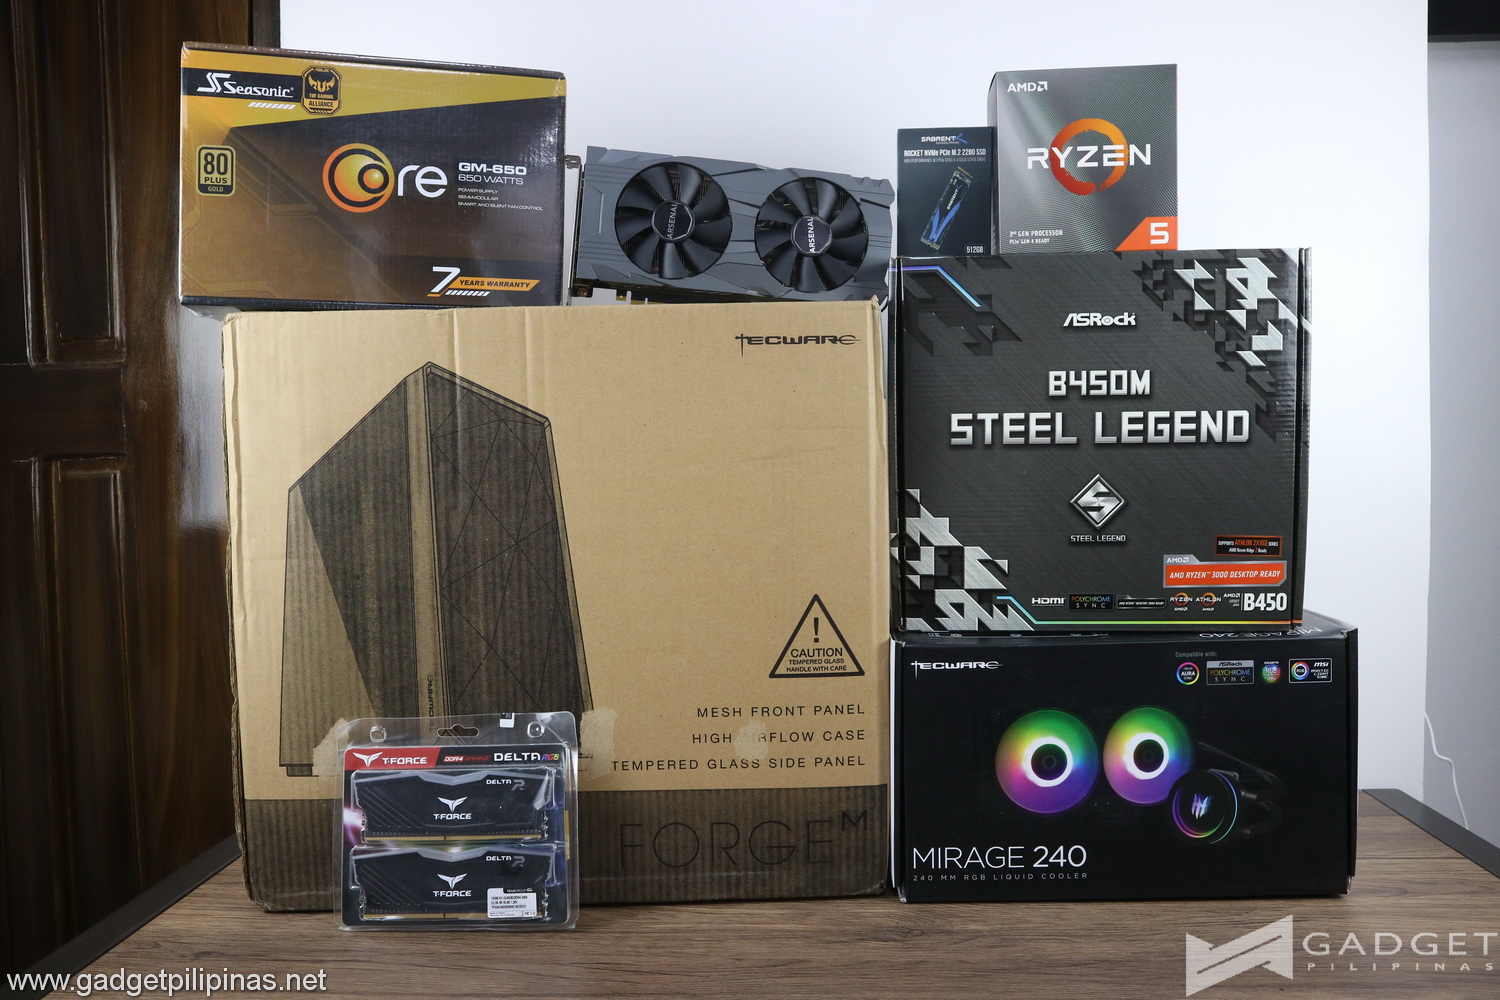 Php 50k Gaming PC Build Guide 2021 Philippines - 01